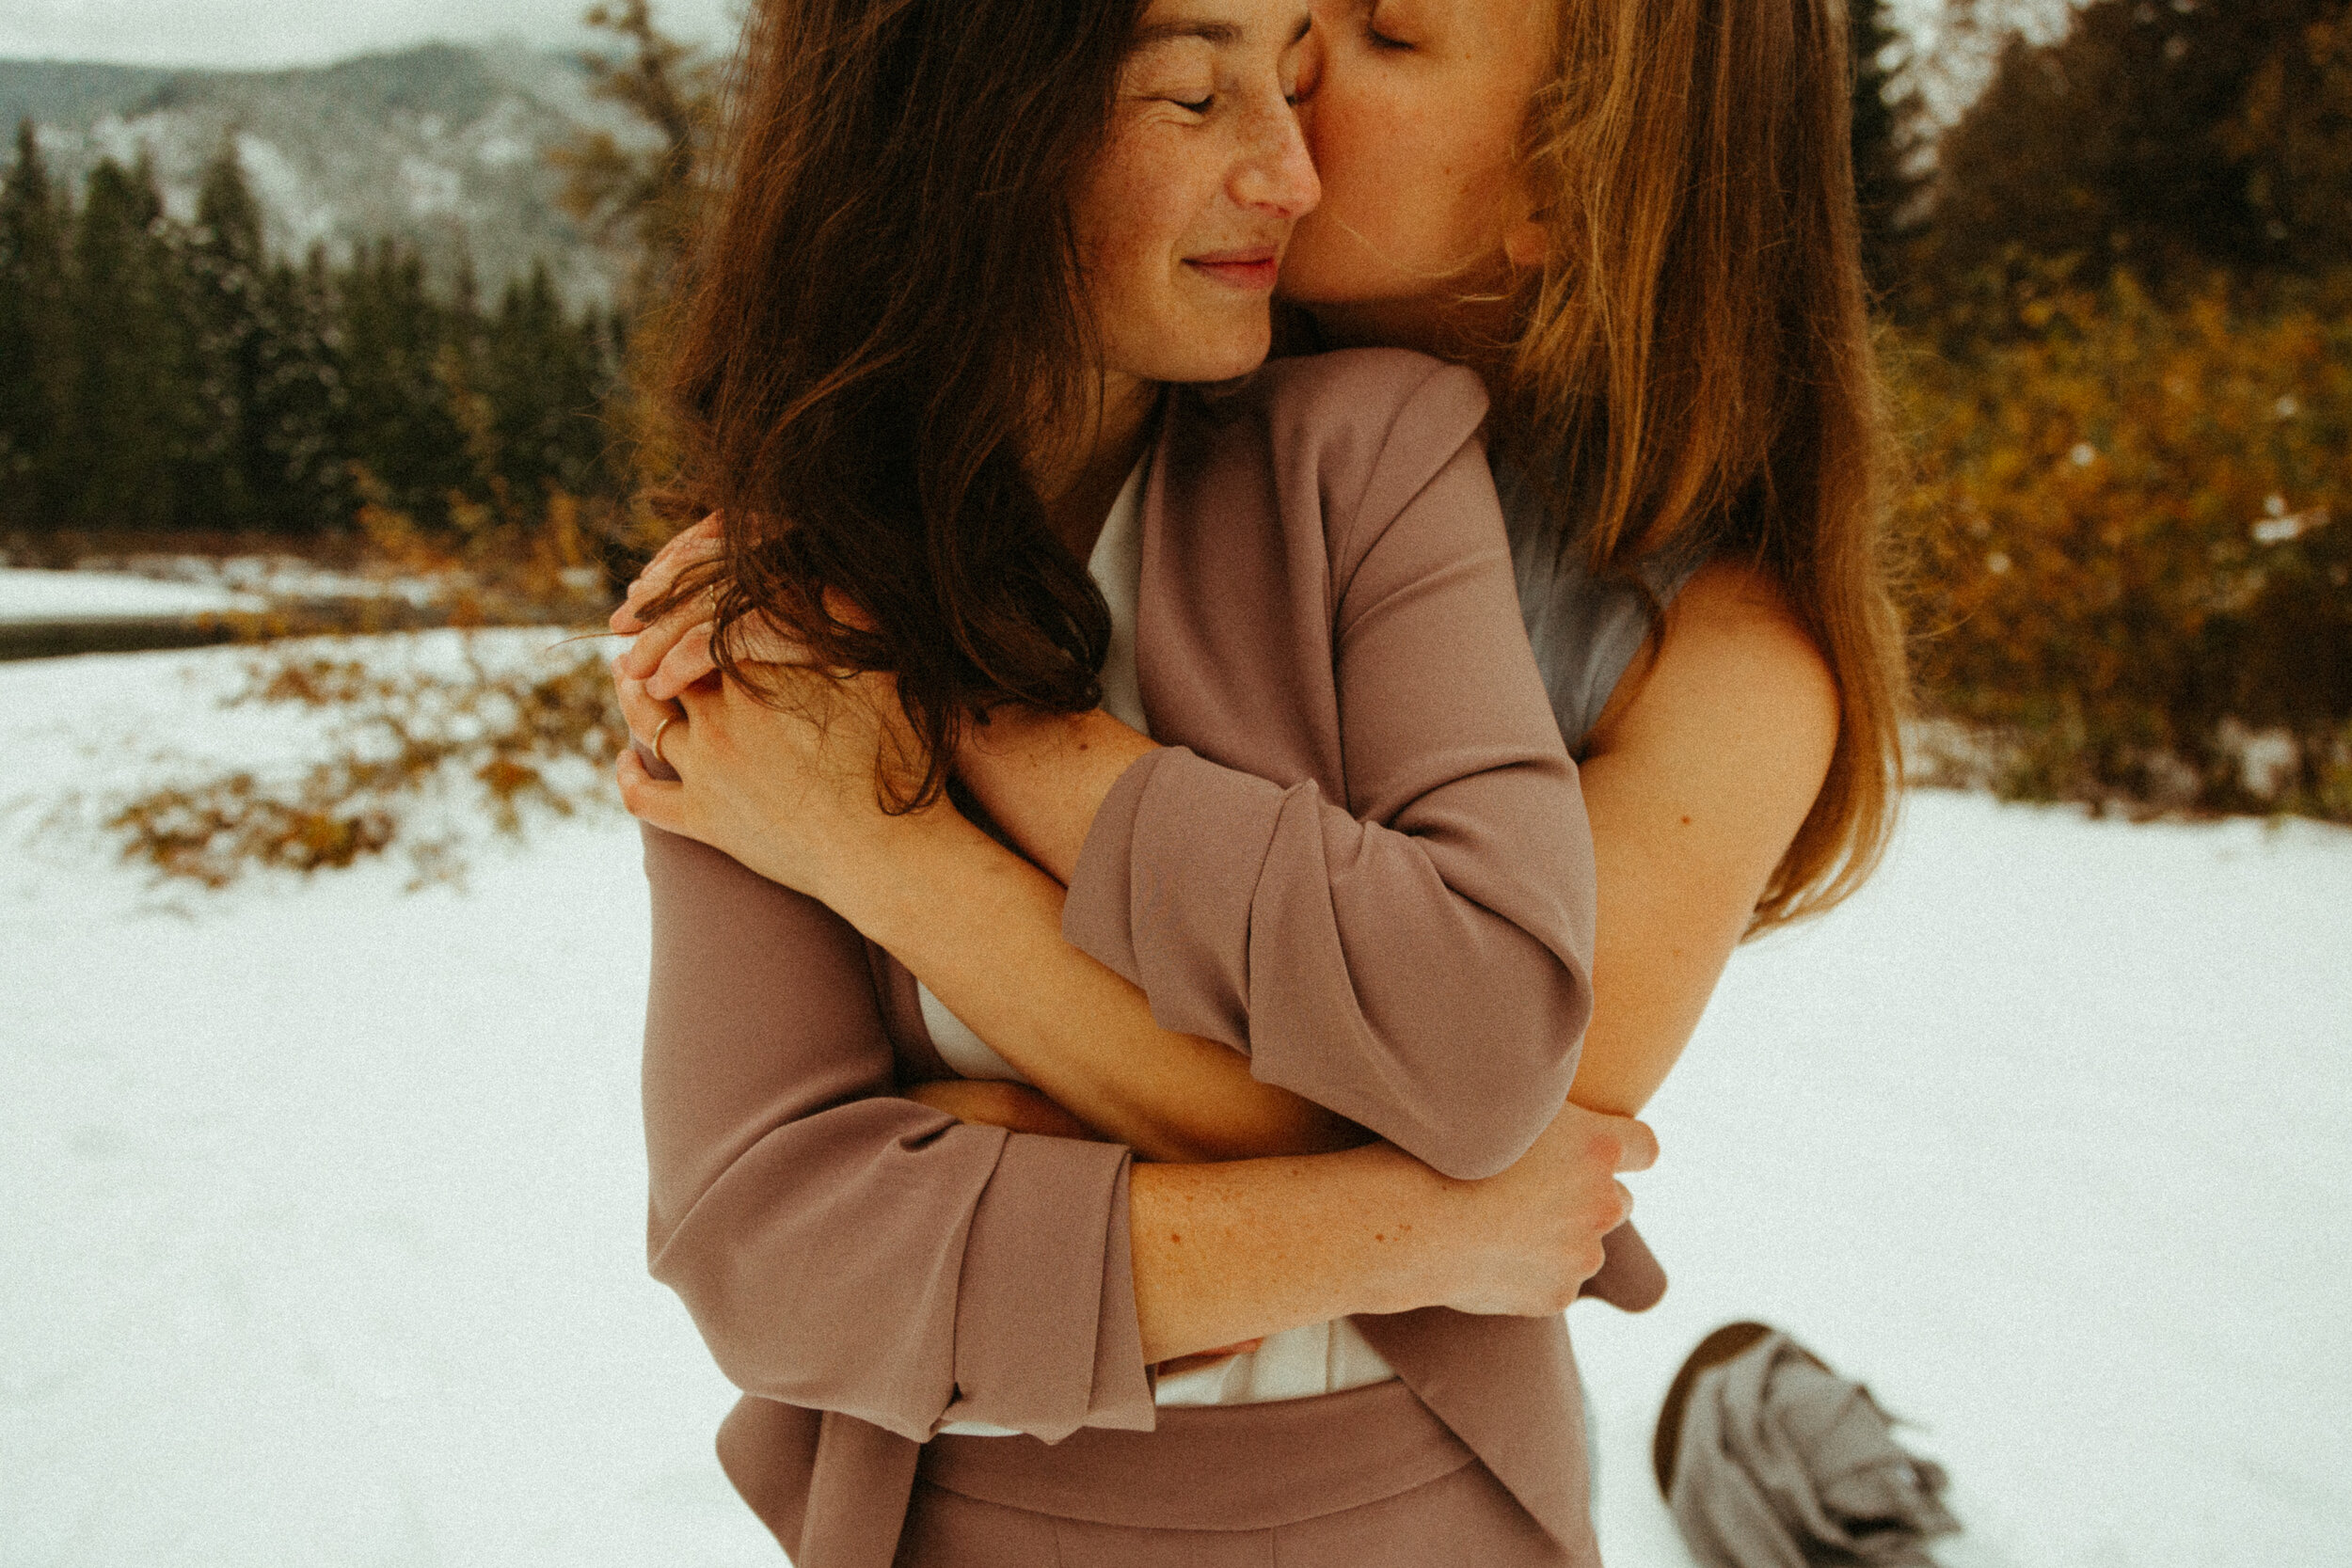 queer-gay-lesbian-trans-affirming-lgbtq-adventure-elopement-intimate-wedding-photographer-pnw-pacific-northwest-pnw-mountain-stream-forest-cowgay-tacoma-seattle-washington-portland-oregon-halle-roland-photography-non-binary-analog-film-artist-165-210.jpg